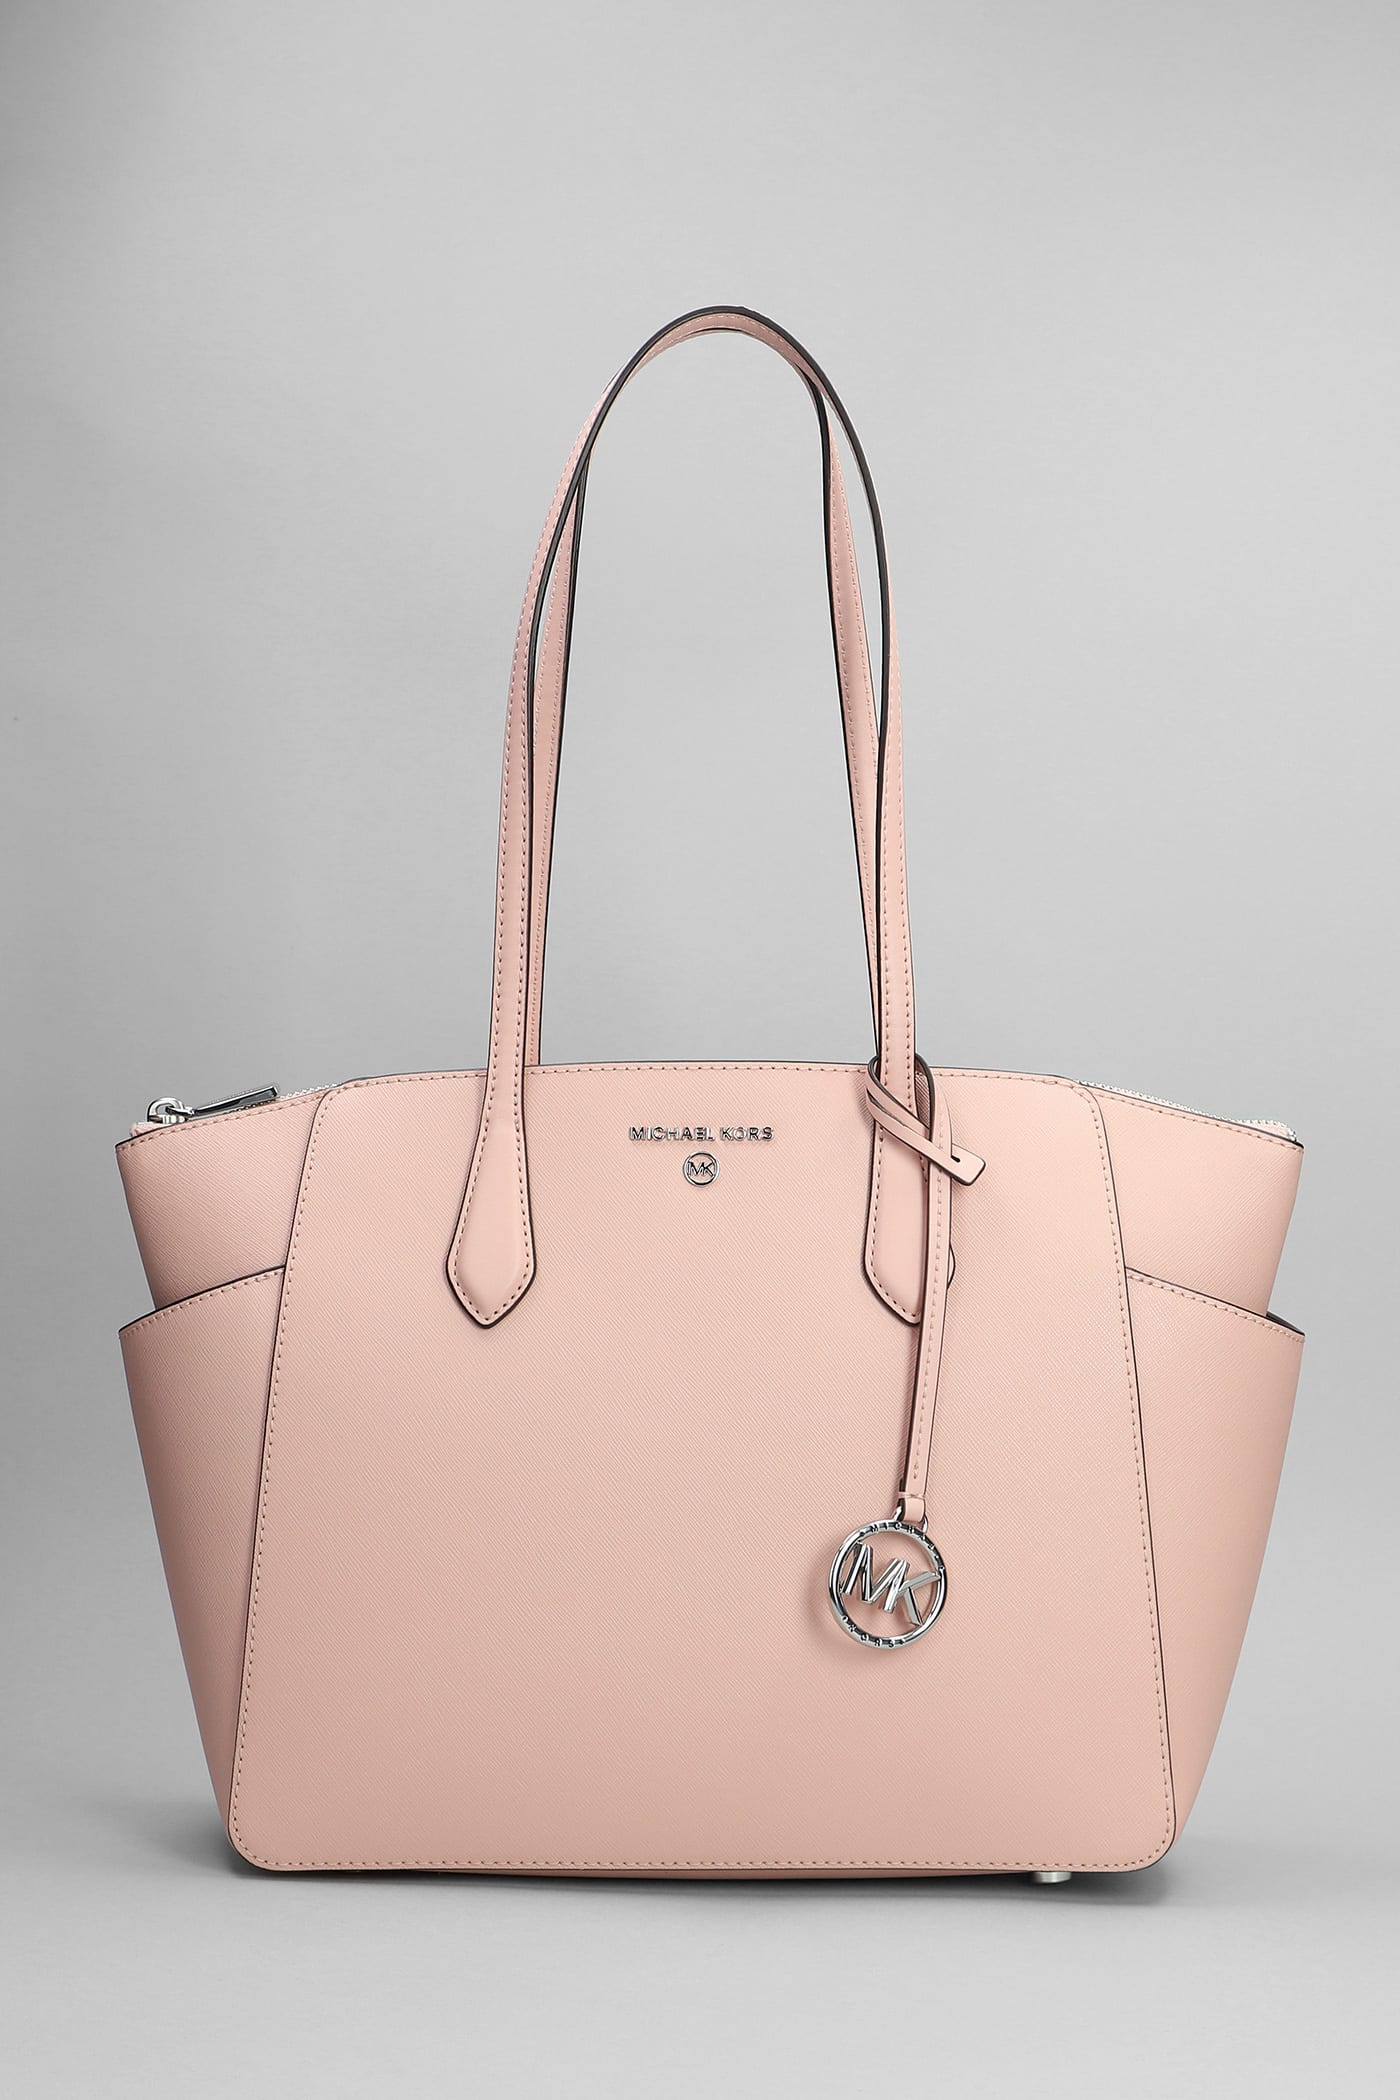 Michael Kors - Women's Marilyn Shopping Bag Tote - Pink - Leather